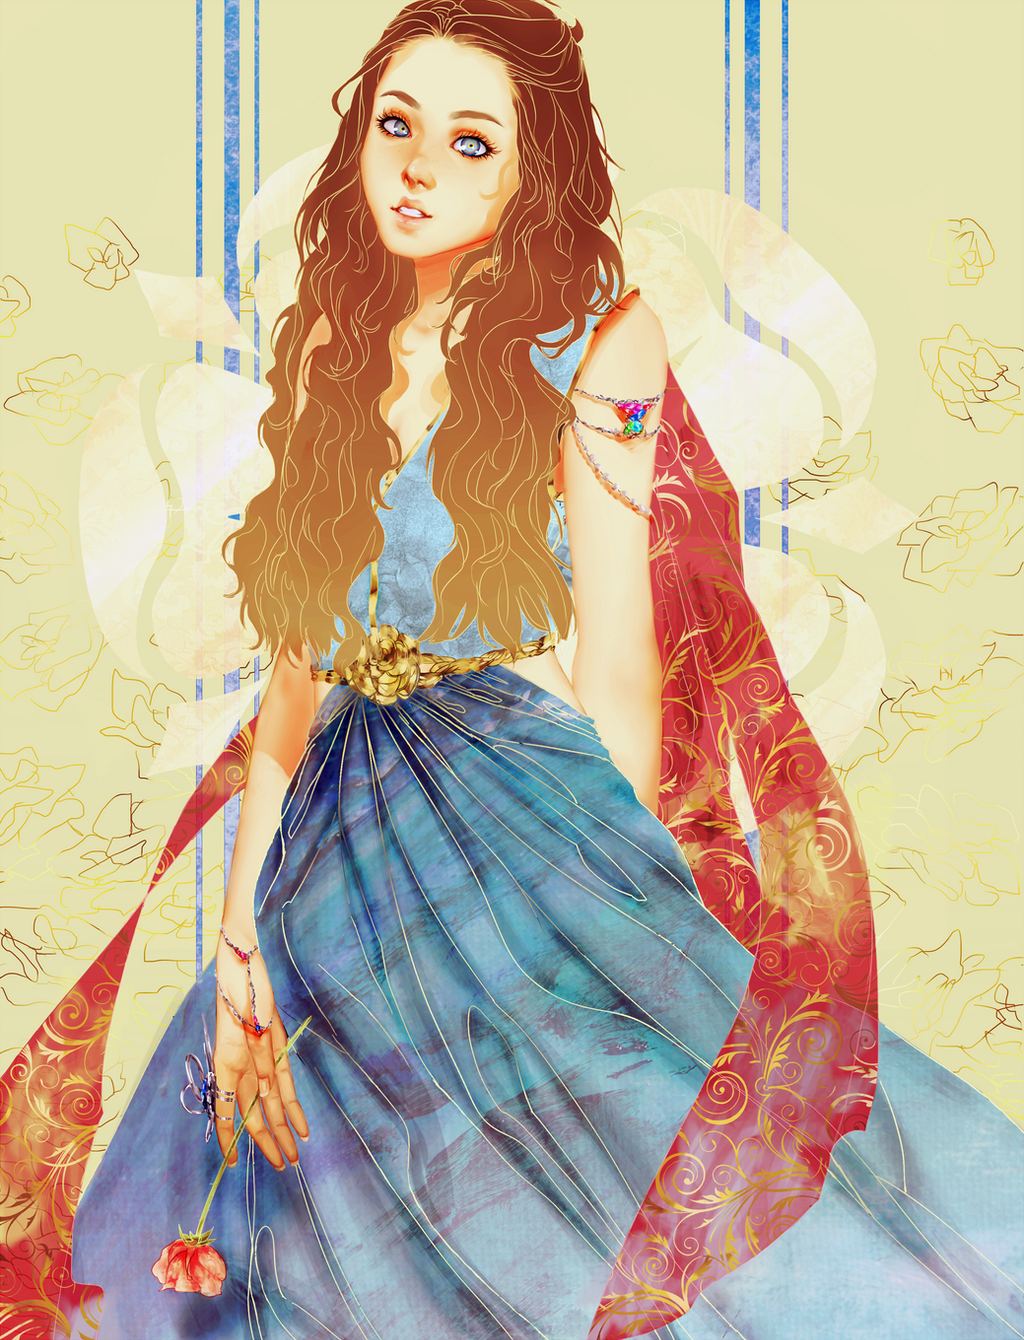 margeary_tyrell___game_of_thrones_by_allegro97-daadnvo.png